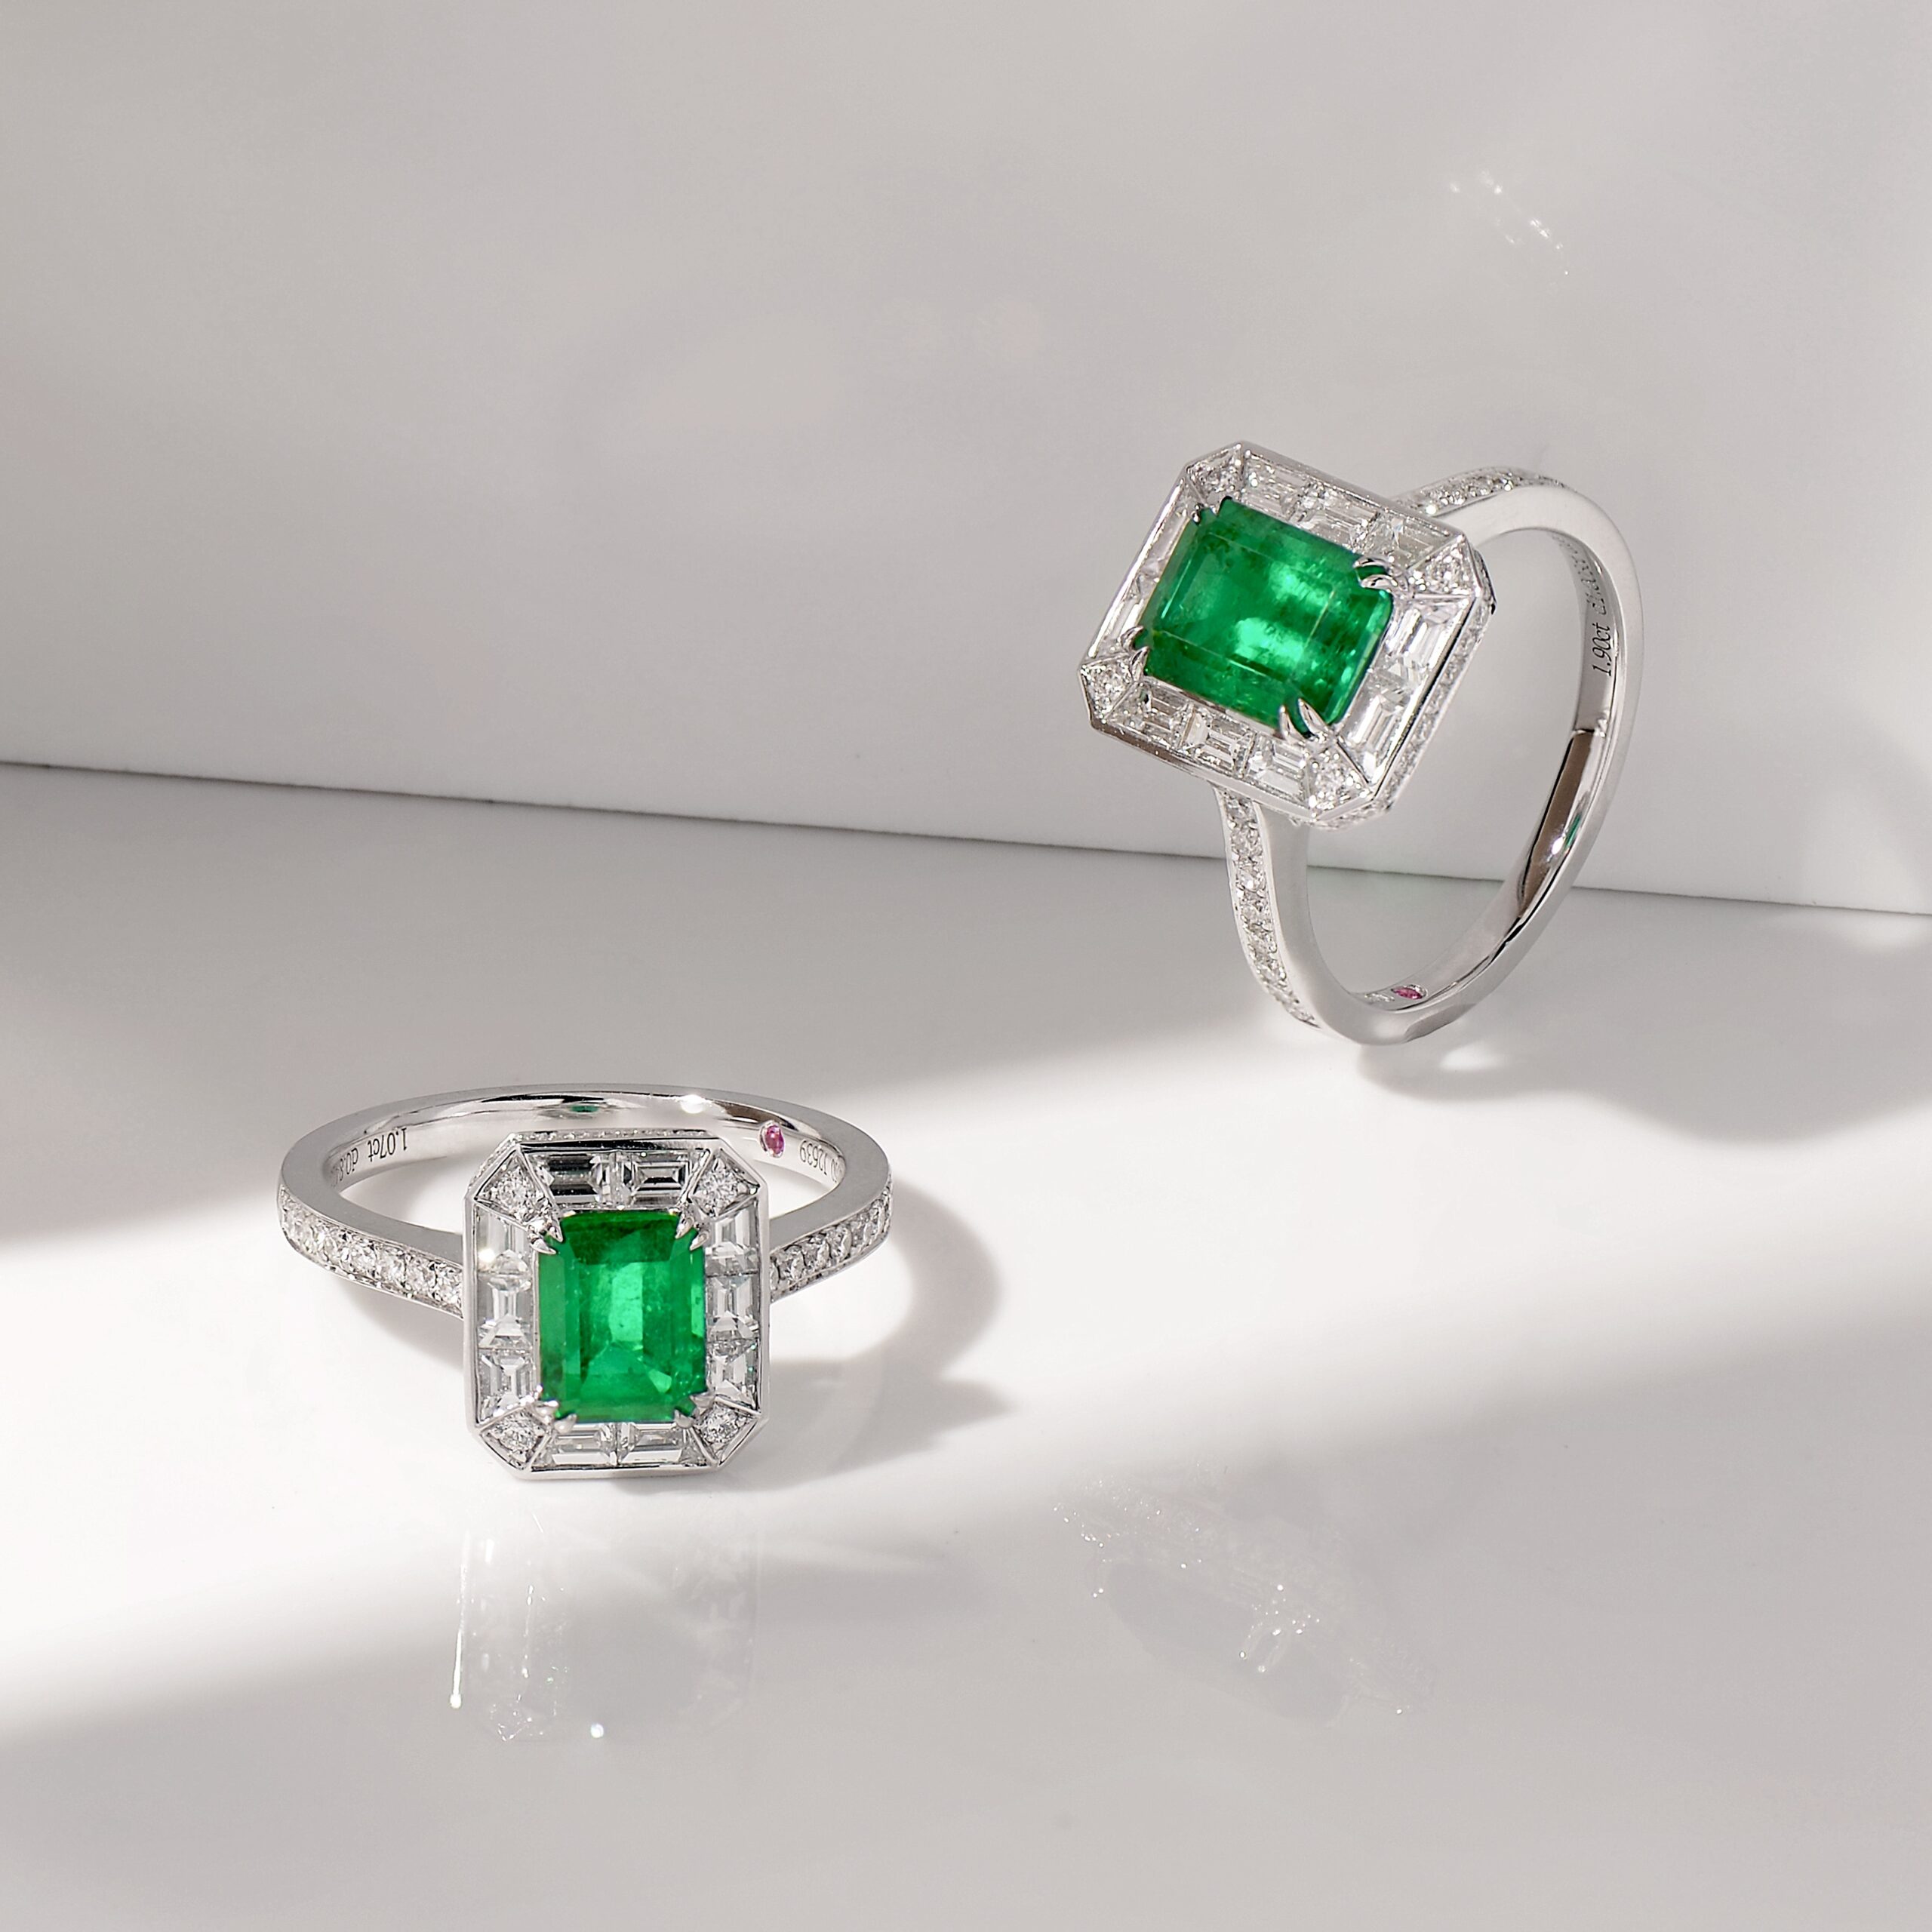 Gemstone Engagement Rings Will Make You Forget All About Diamonds